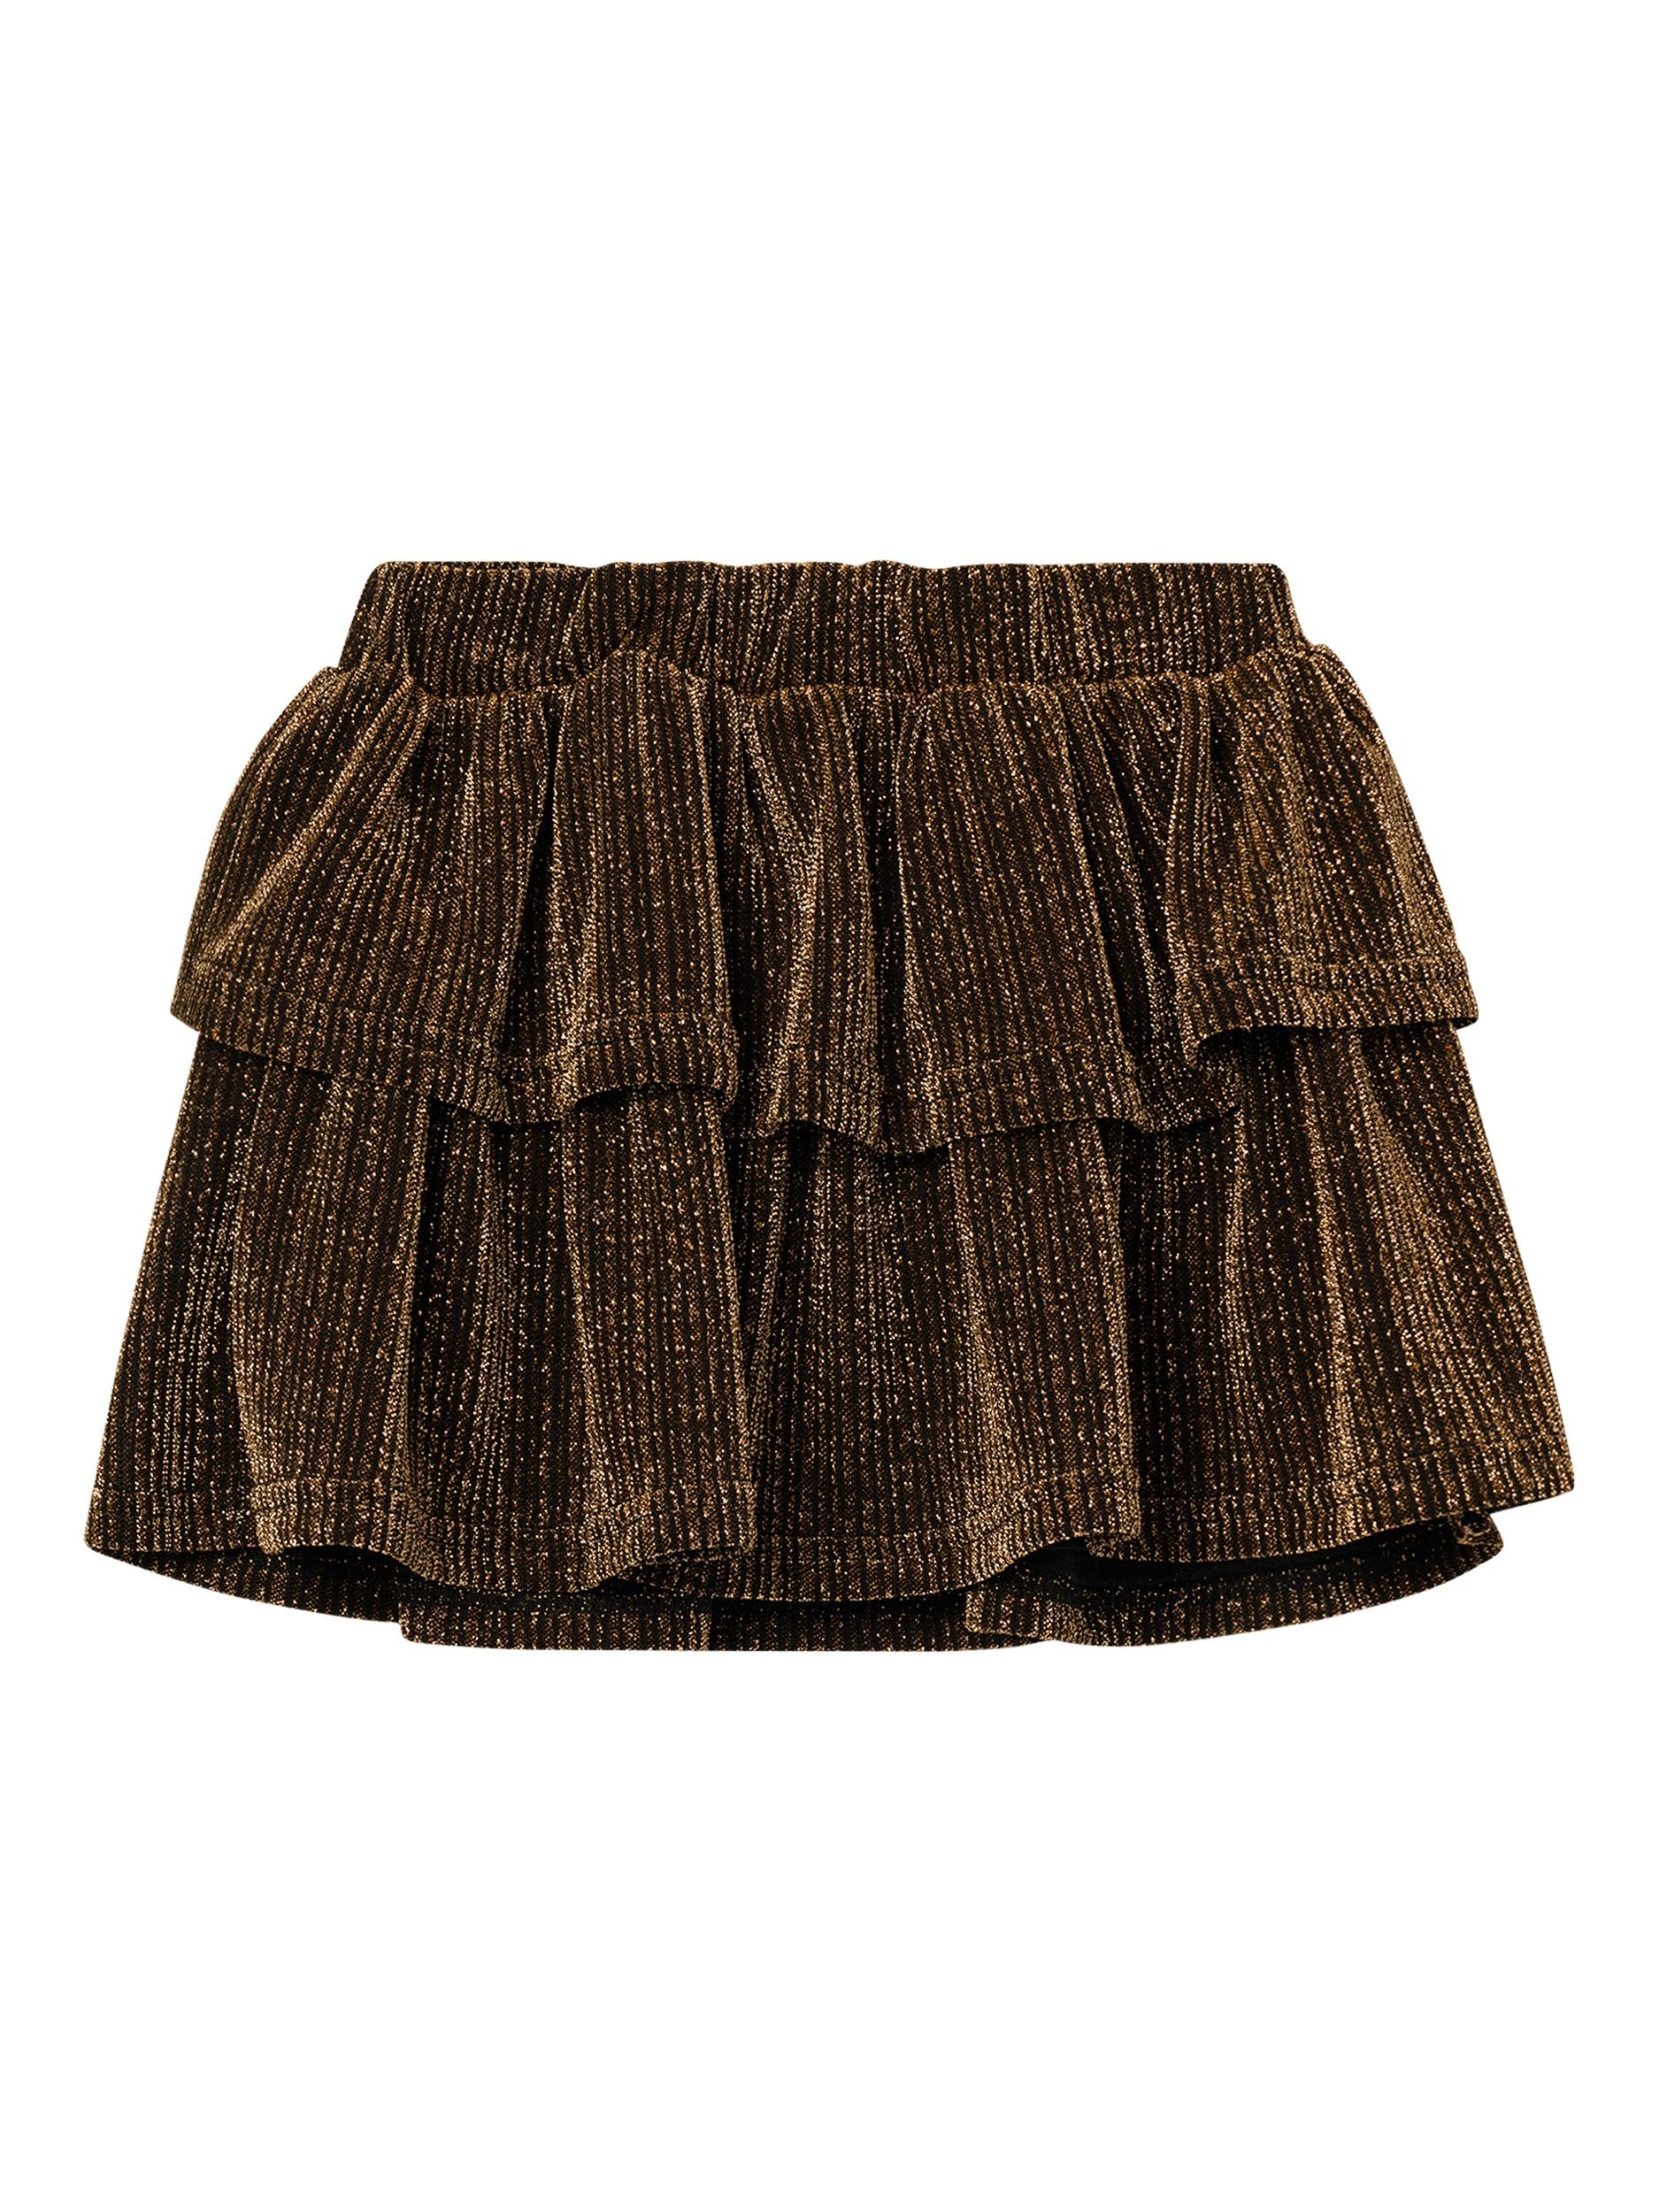 Girl's Risilk Skirt-Gold Colour-Front View